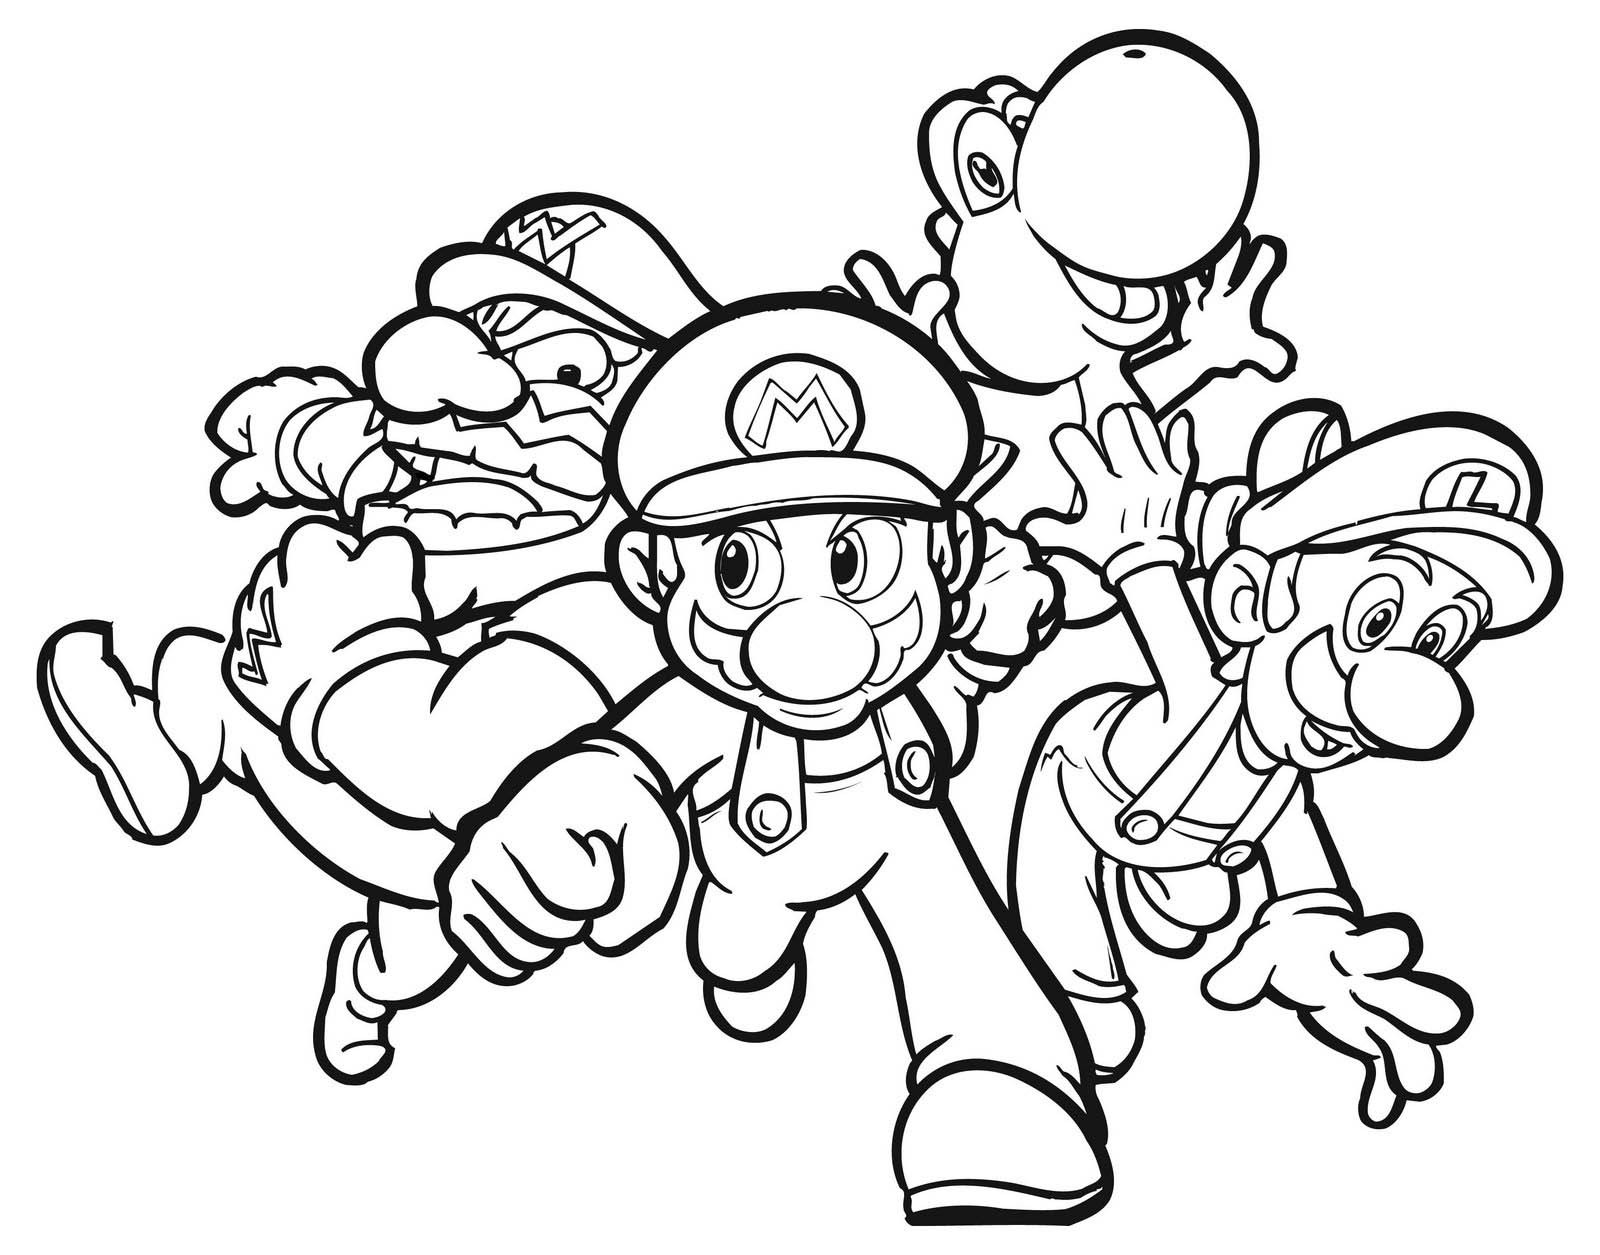 Mario Coloring Pages Printable Free
 Super Mario Coloring Pages Free Printable Coloring Pages